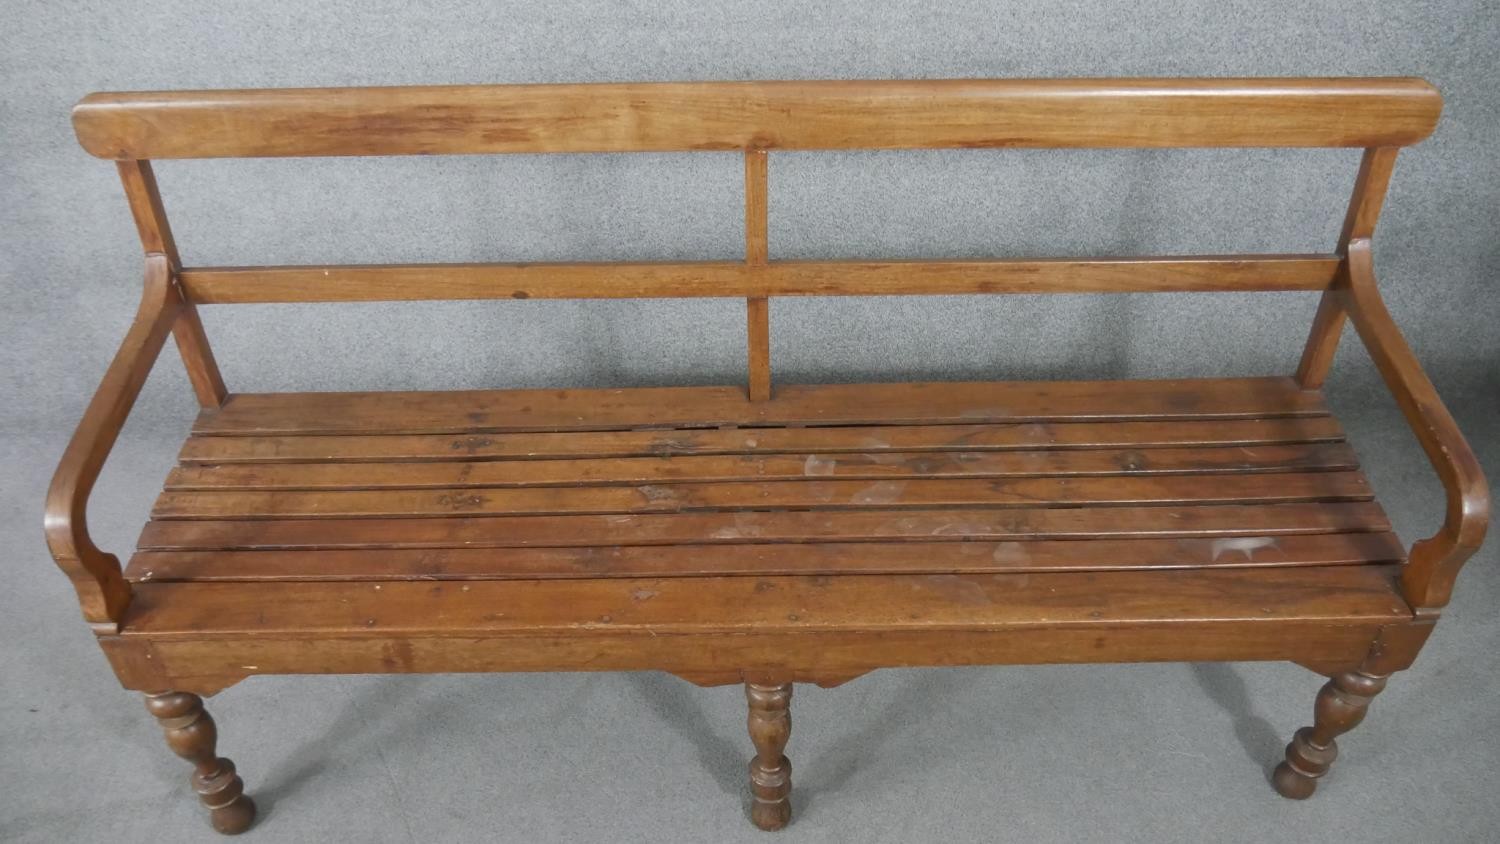 An Indian teak bench, with a bar back and open arms, over a slatted seat, on turned legs. H.93 W.165 - Image 2 of 6